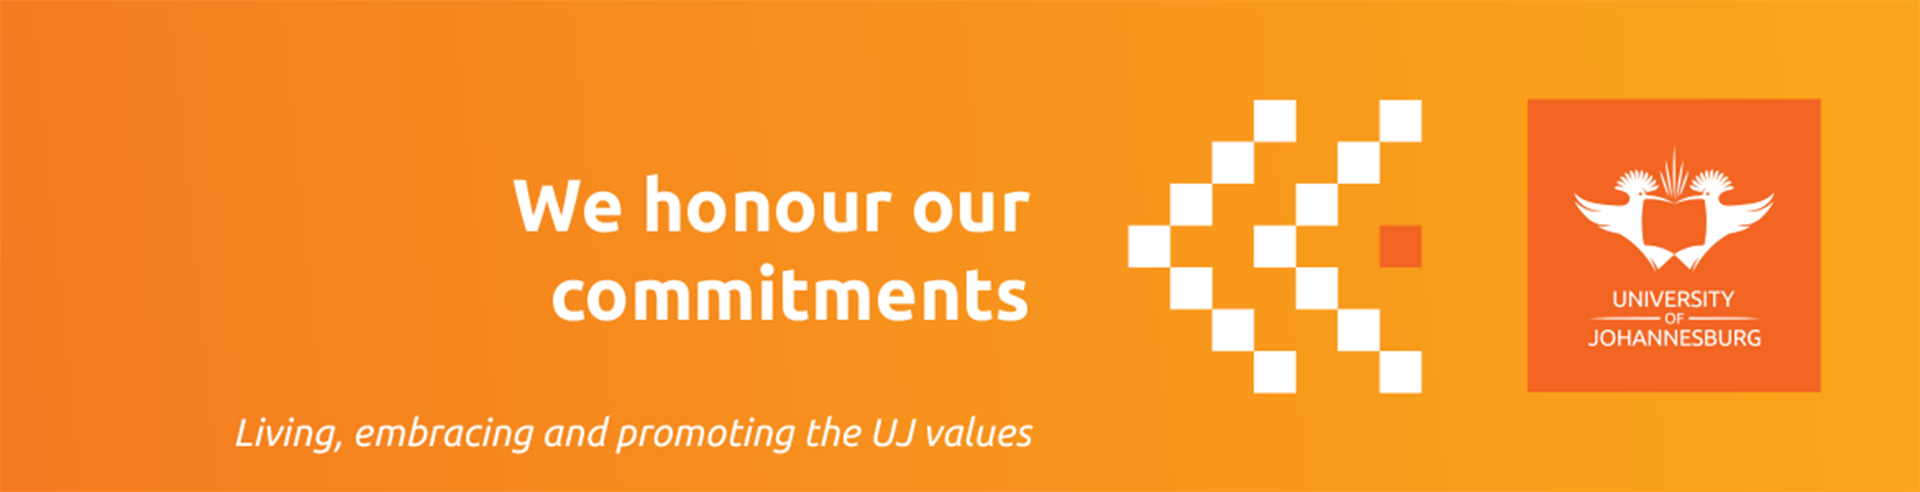 Uj Values Expressions Posters 2020 Ulink 1170x300mm 3